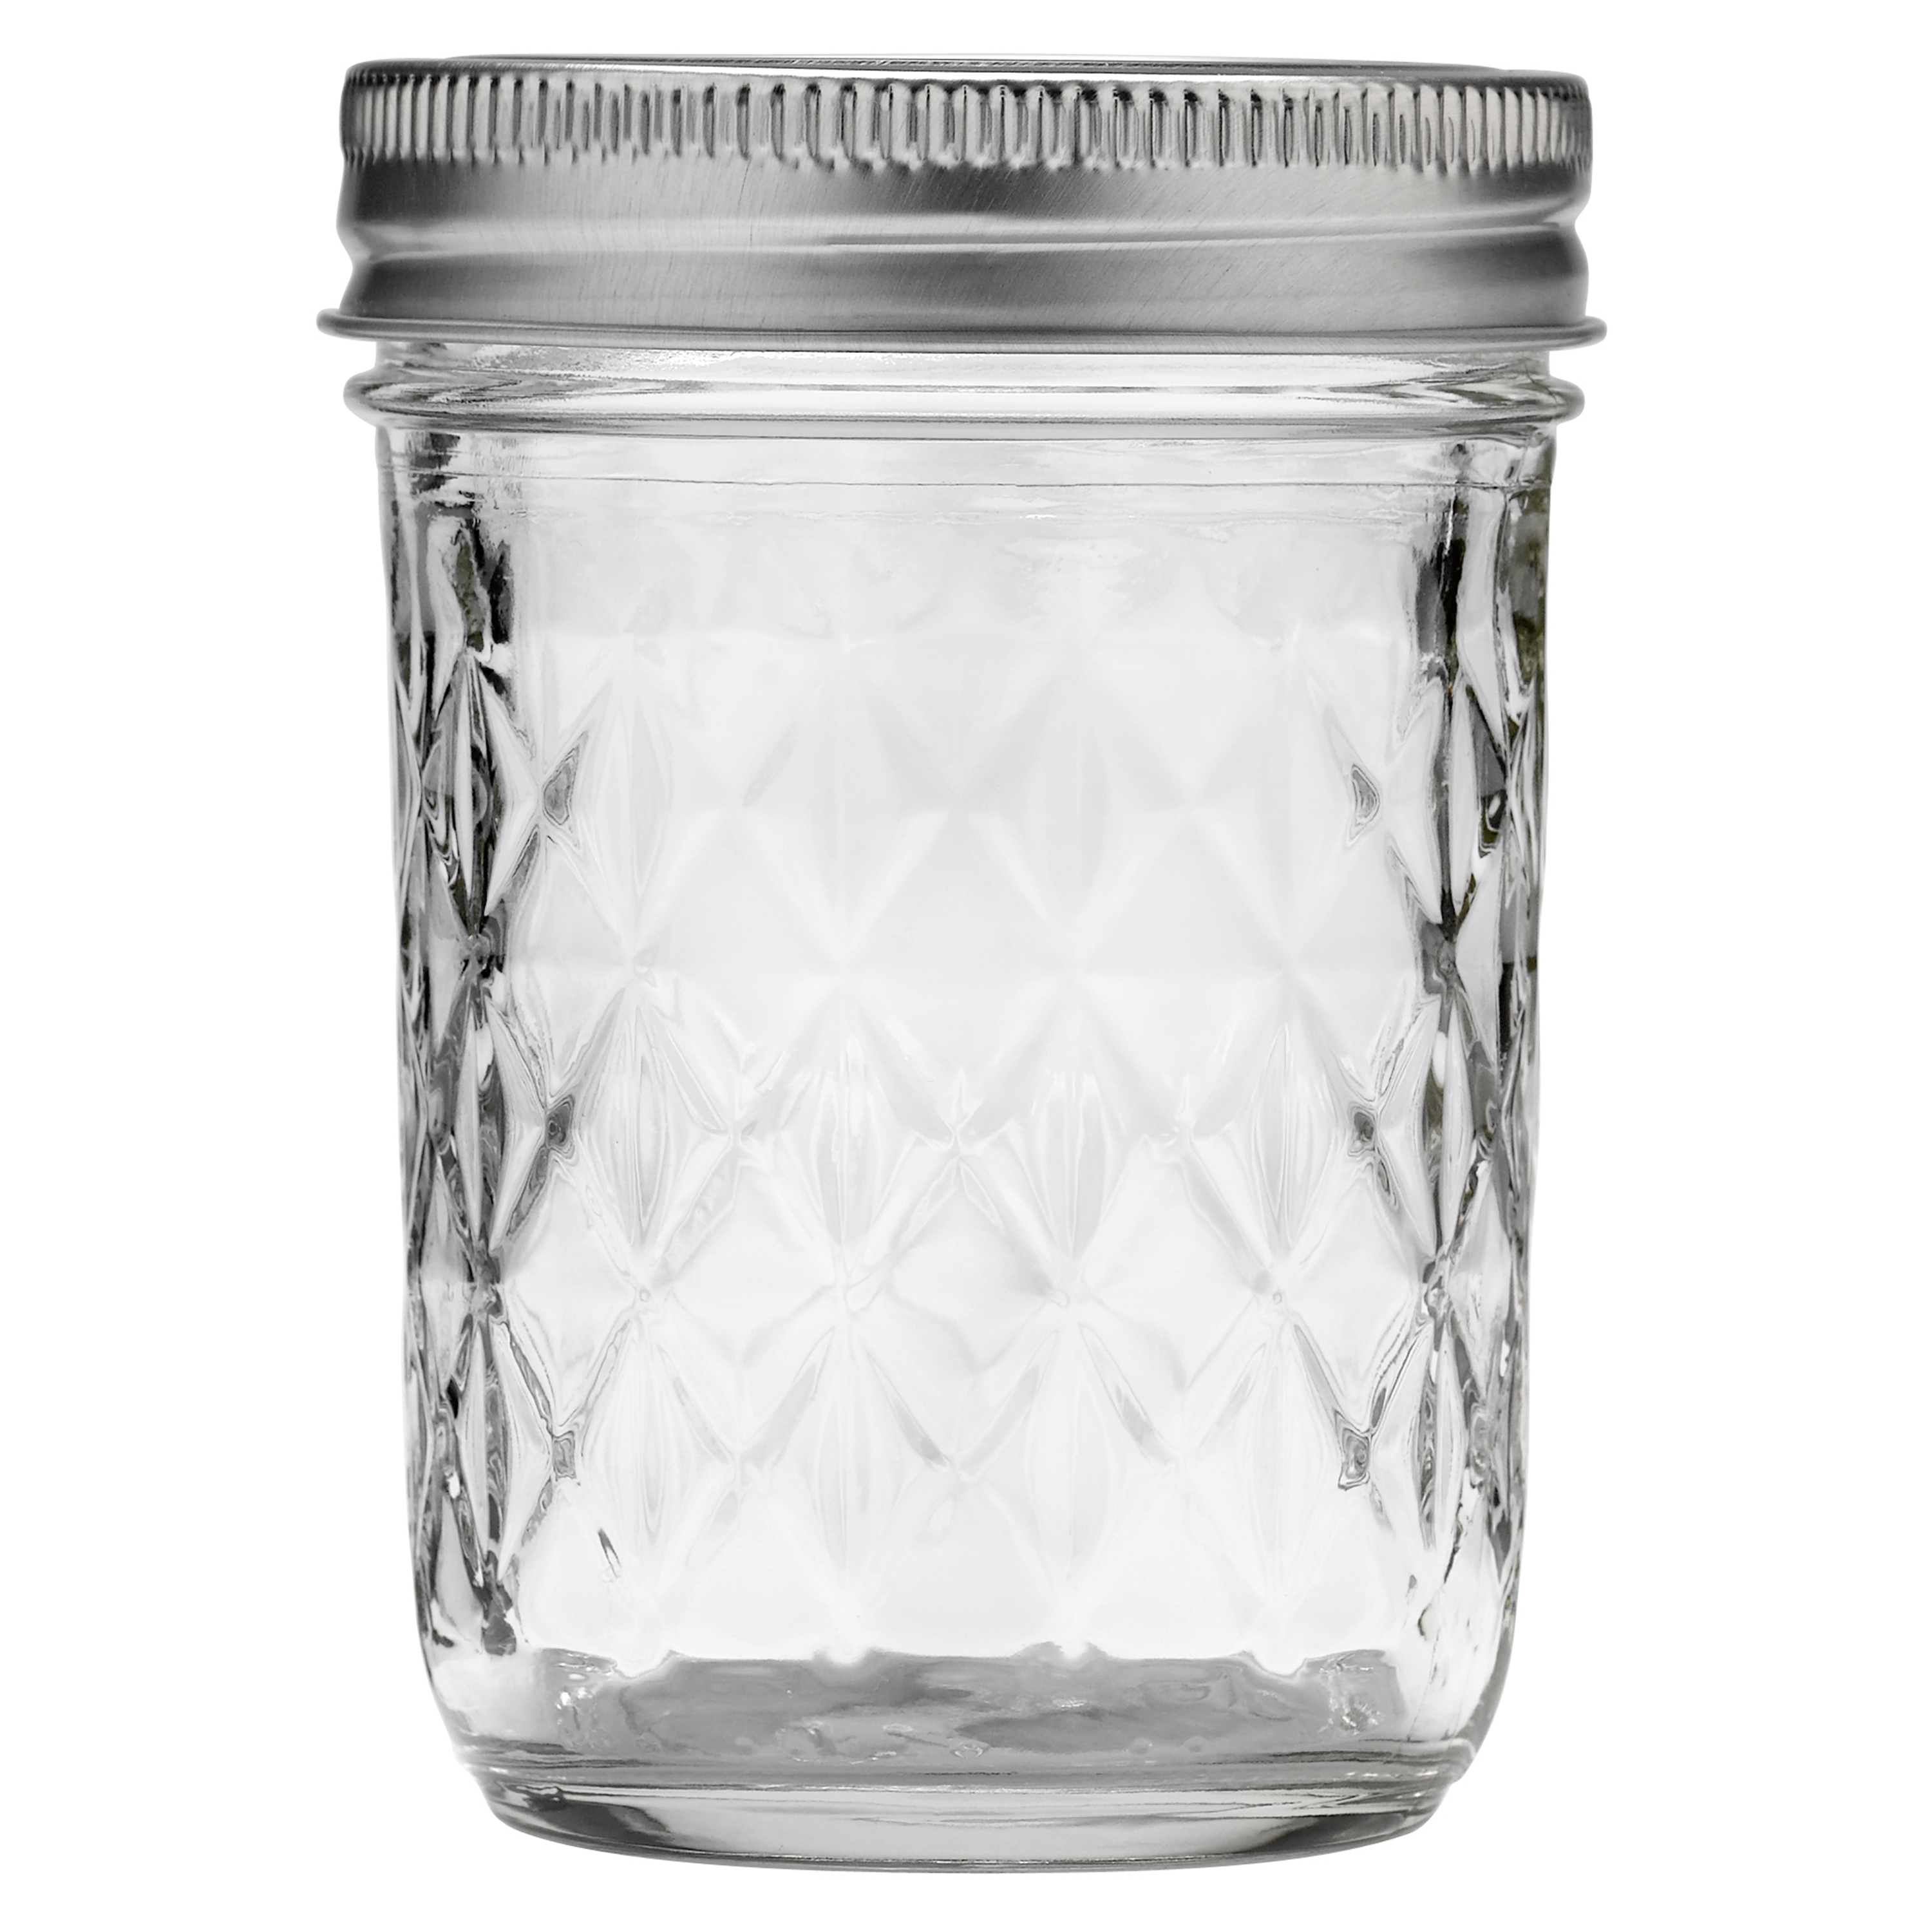 Ball Quilted Crystal Mason Jar w/ Lid & Band, Regular Mouth, 8 Ounces, 12 Count, 4 Lb. - image 5 of 8